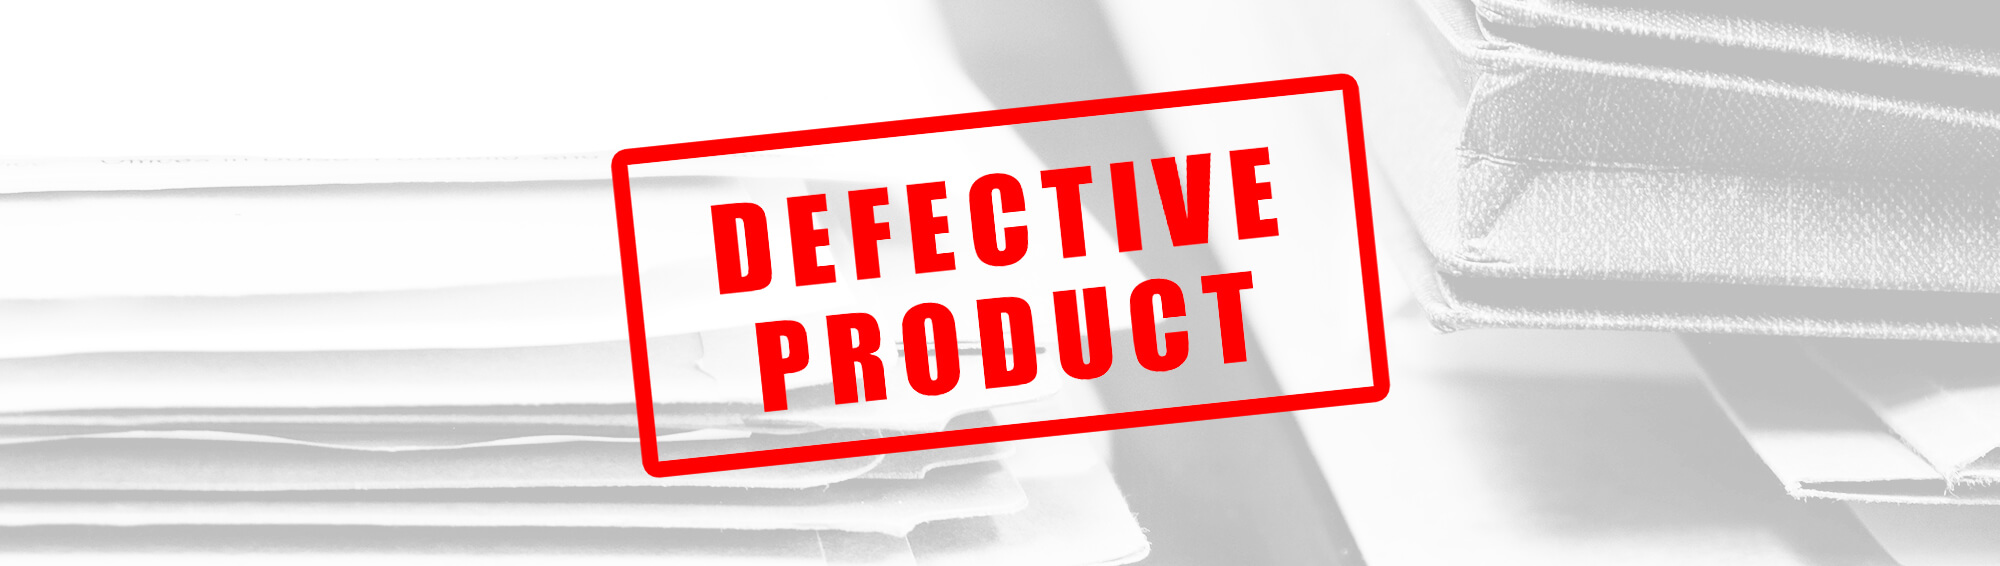 Defective Products4 - Blog Banner